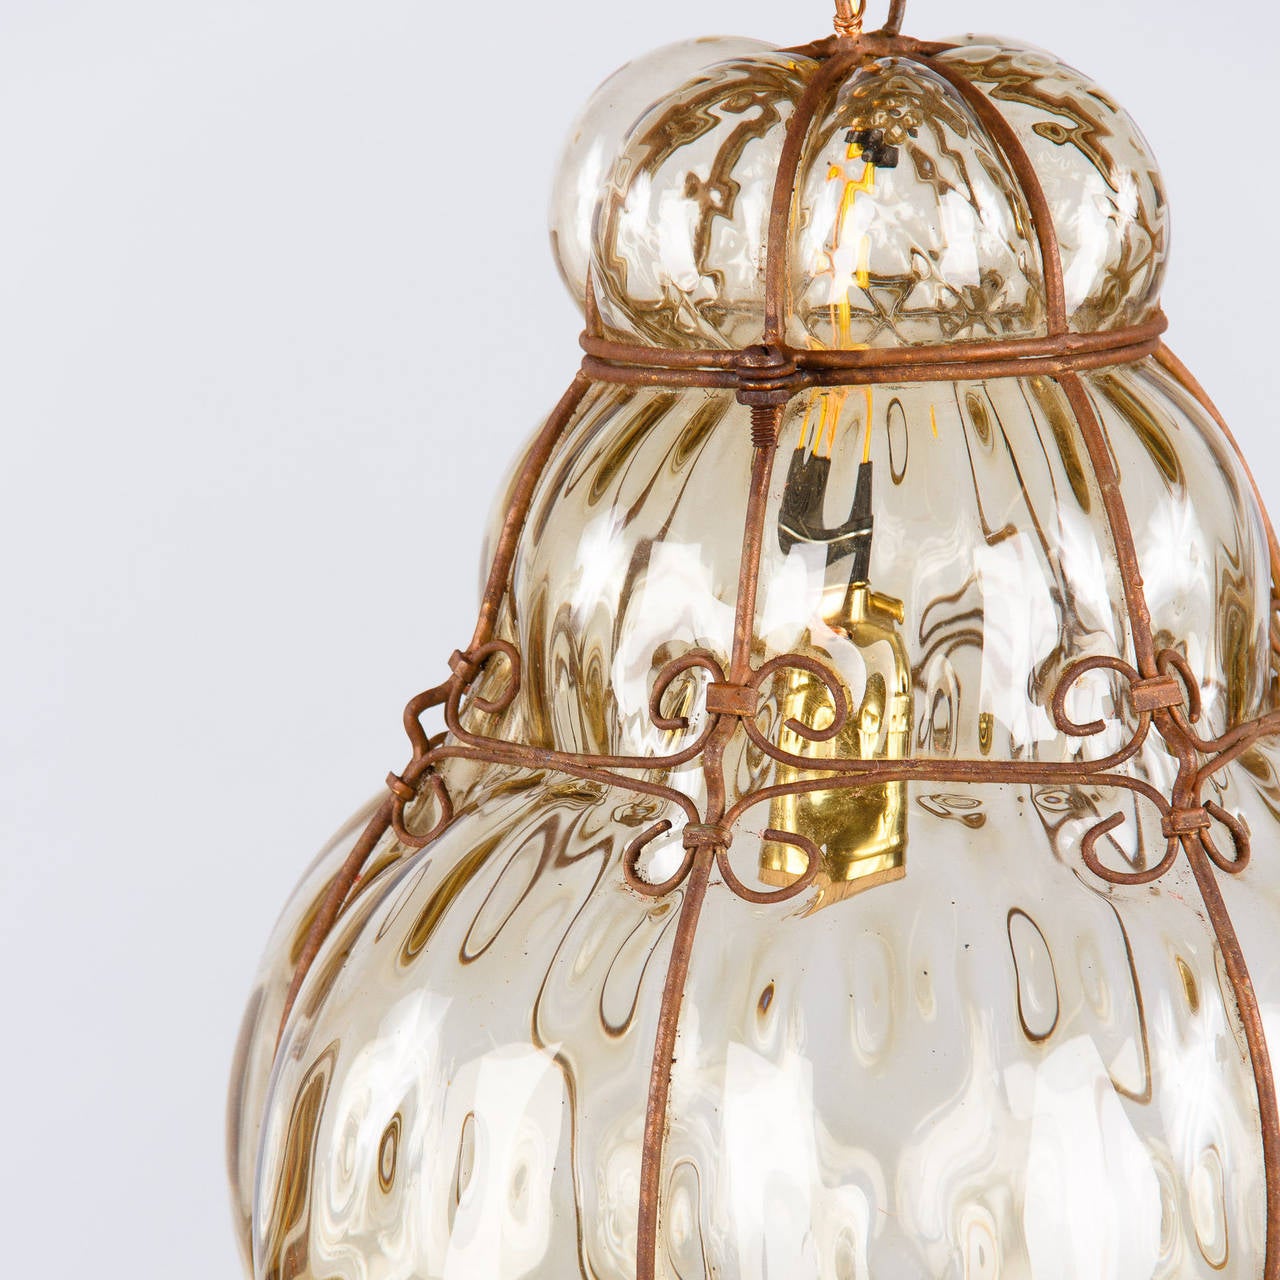 A 1940s Murano wire cage lantern with handblown bubble glass in light amber tones. The fixture is housing a single medium size light bulb up to 100w. The original adjustable chain and canopy add 24